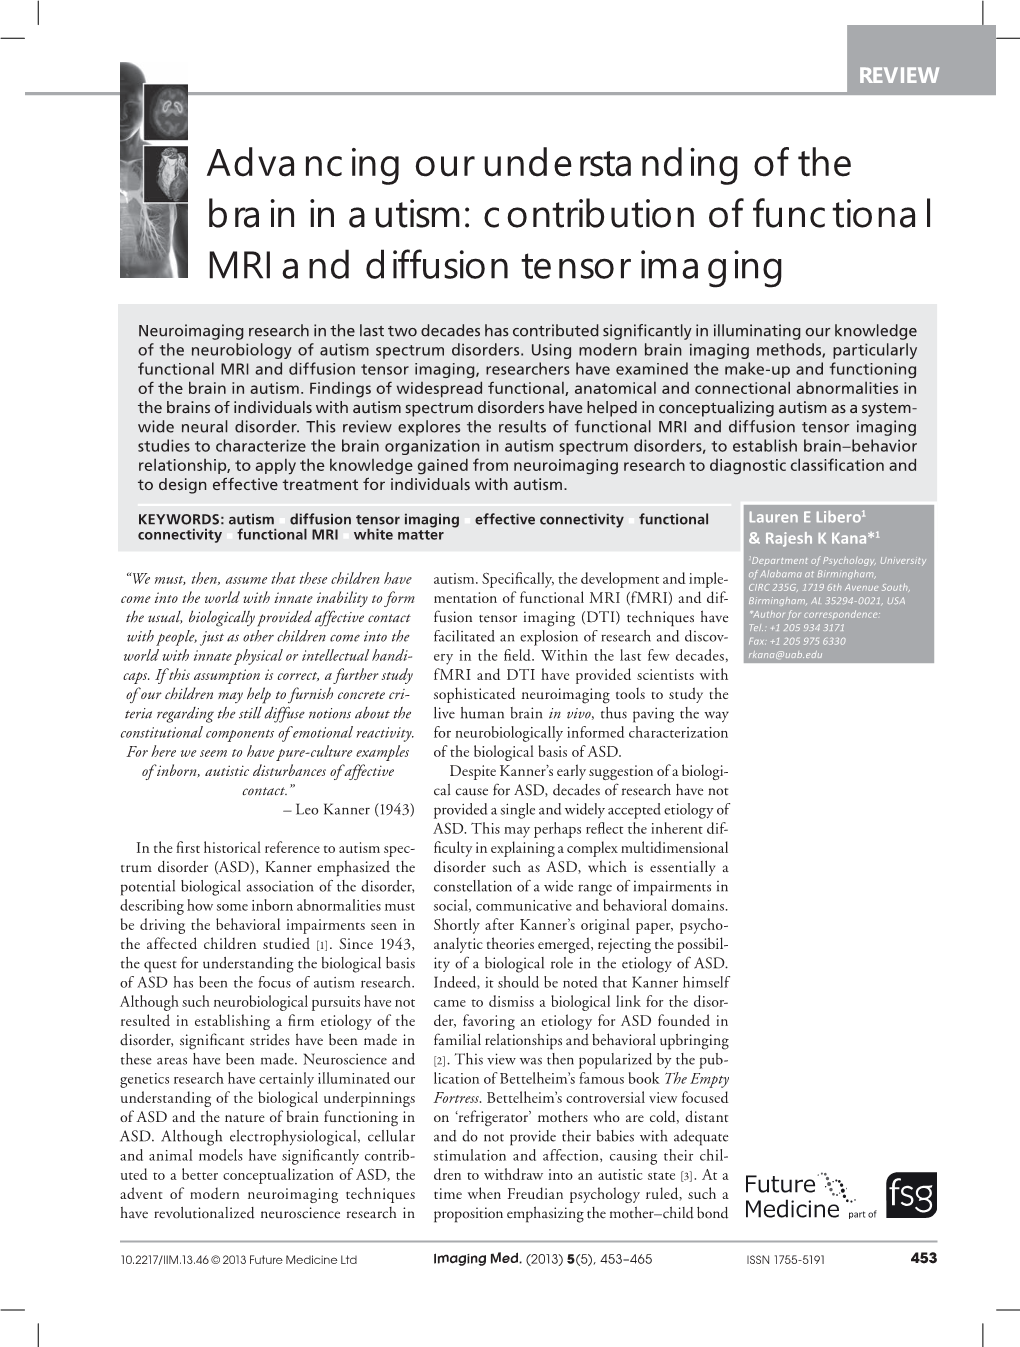 Advancing Our Understanding of the Brain in Autism: Contribution of Functional MRI and Diffusion Tensor Imaging